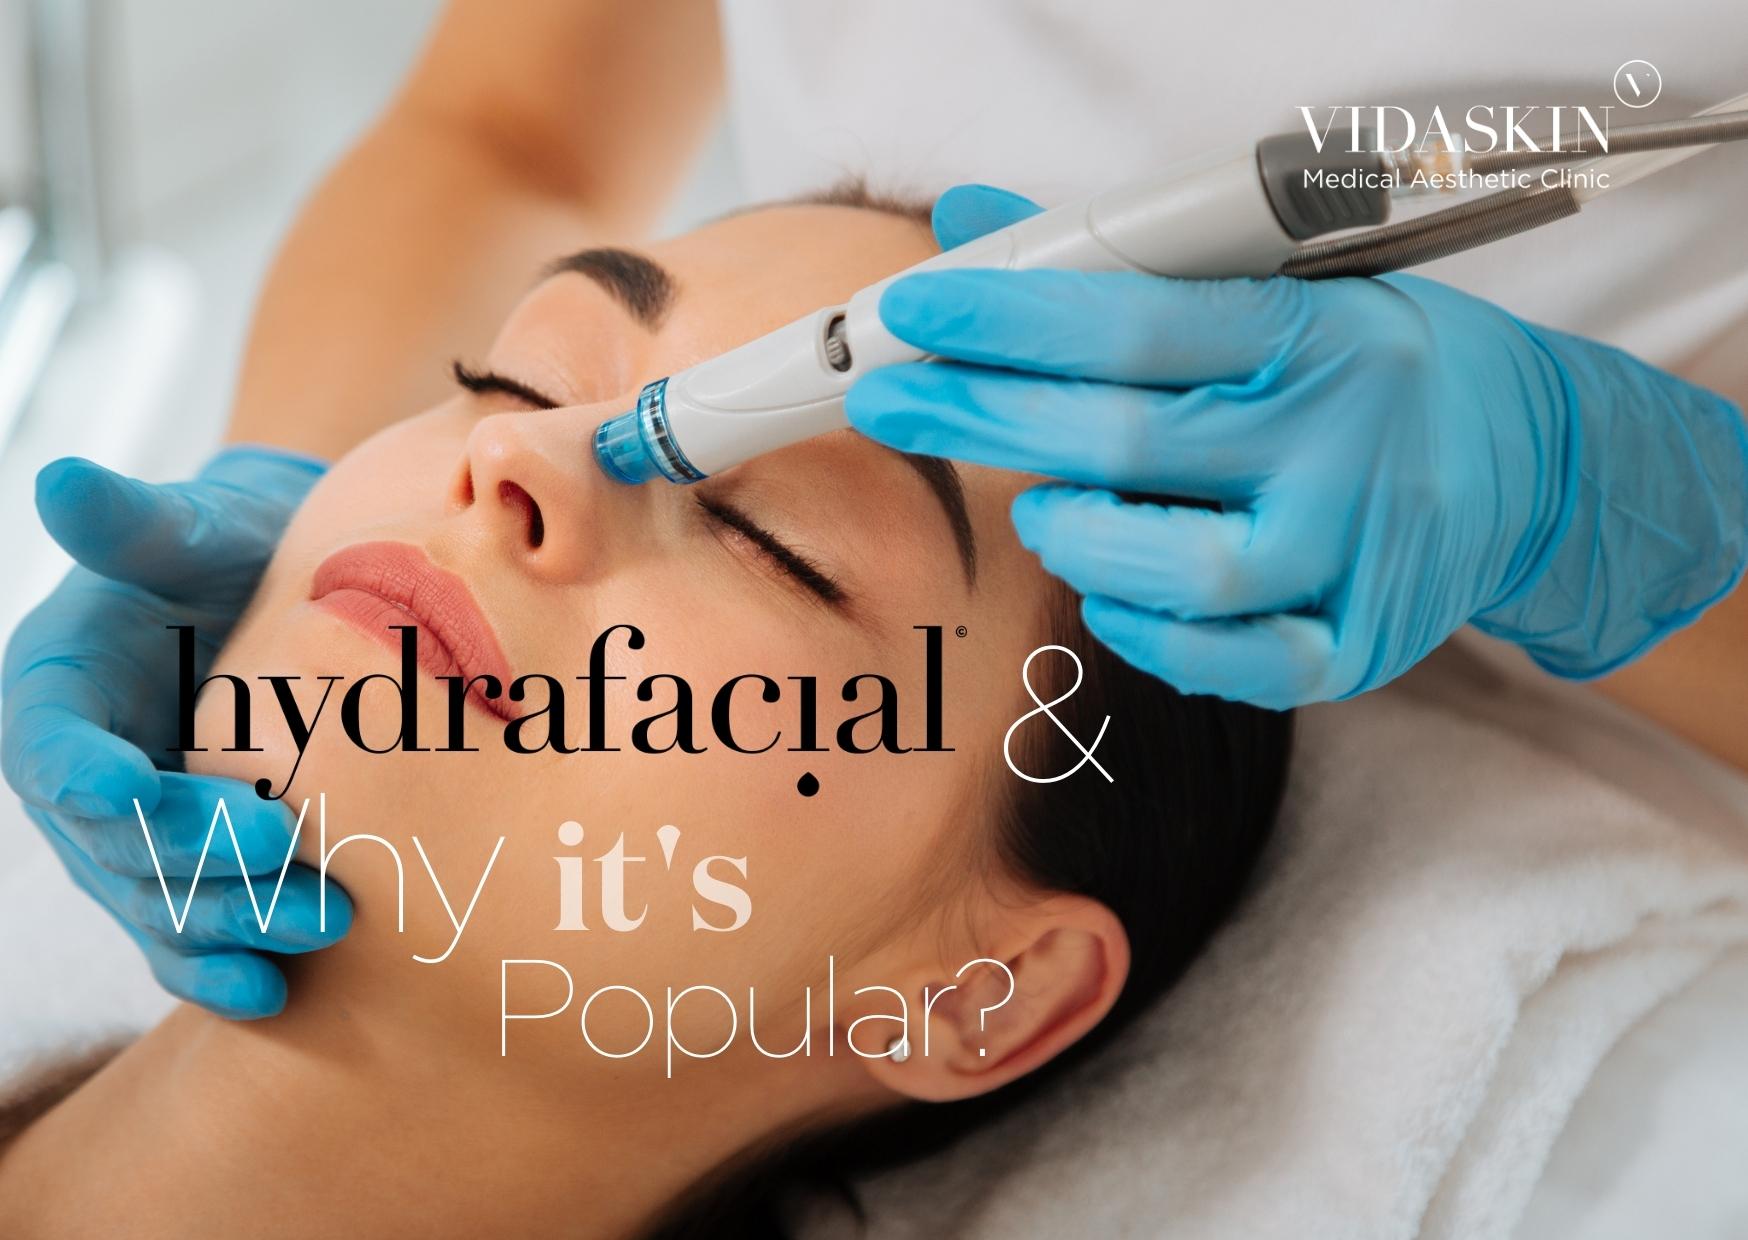 The Hydrafacial: Why It’s a Favorite Facial for Many and Its Celebrity Following